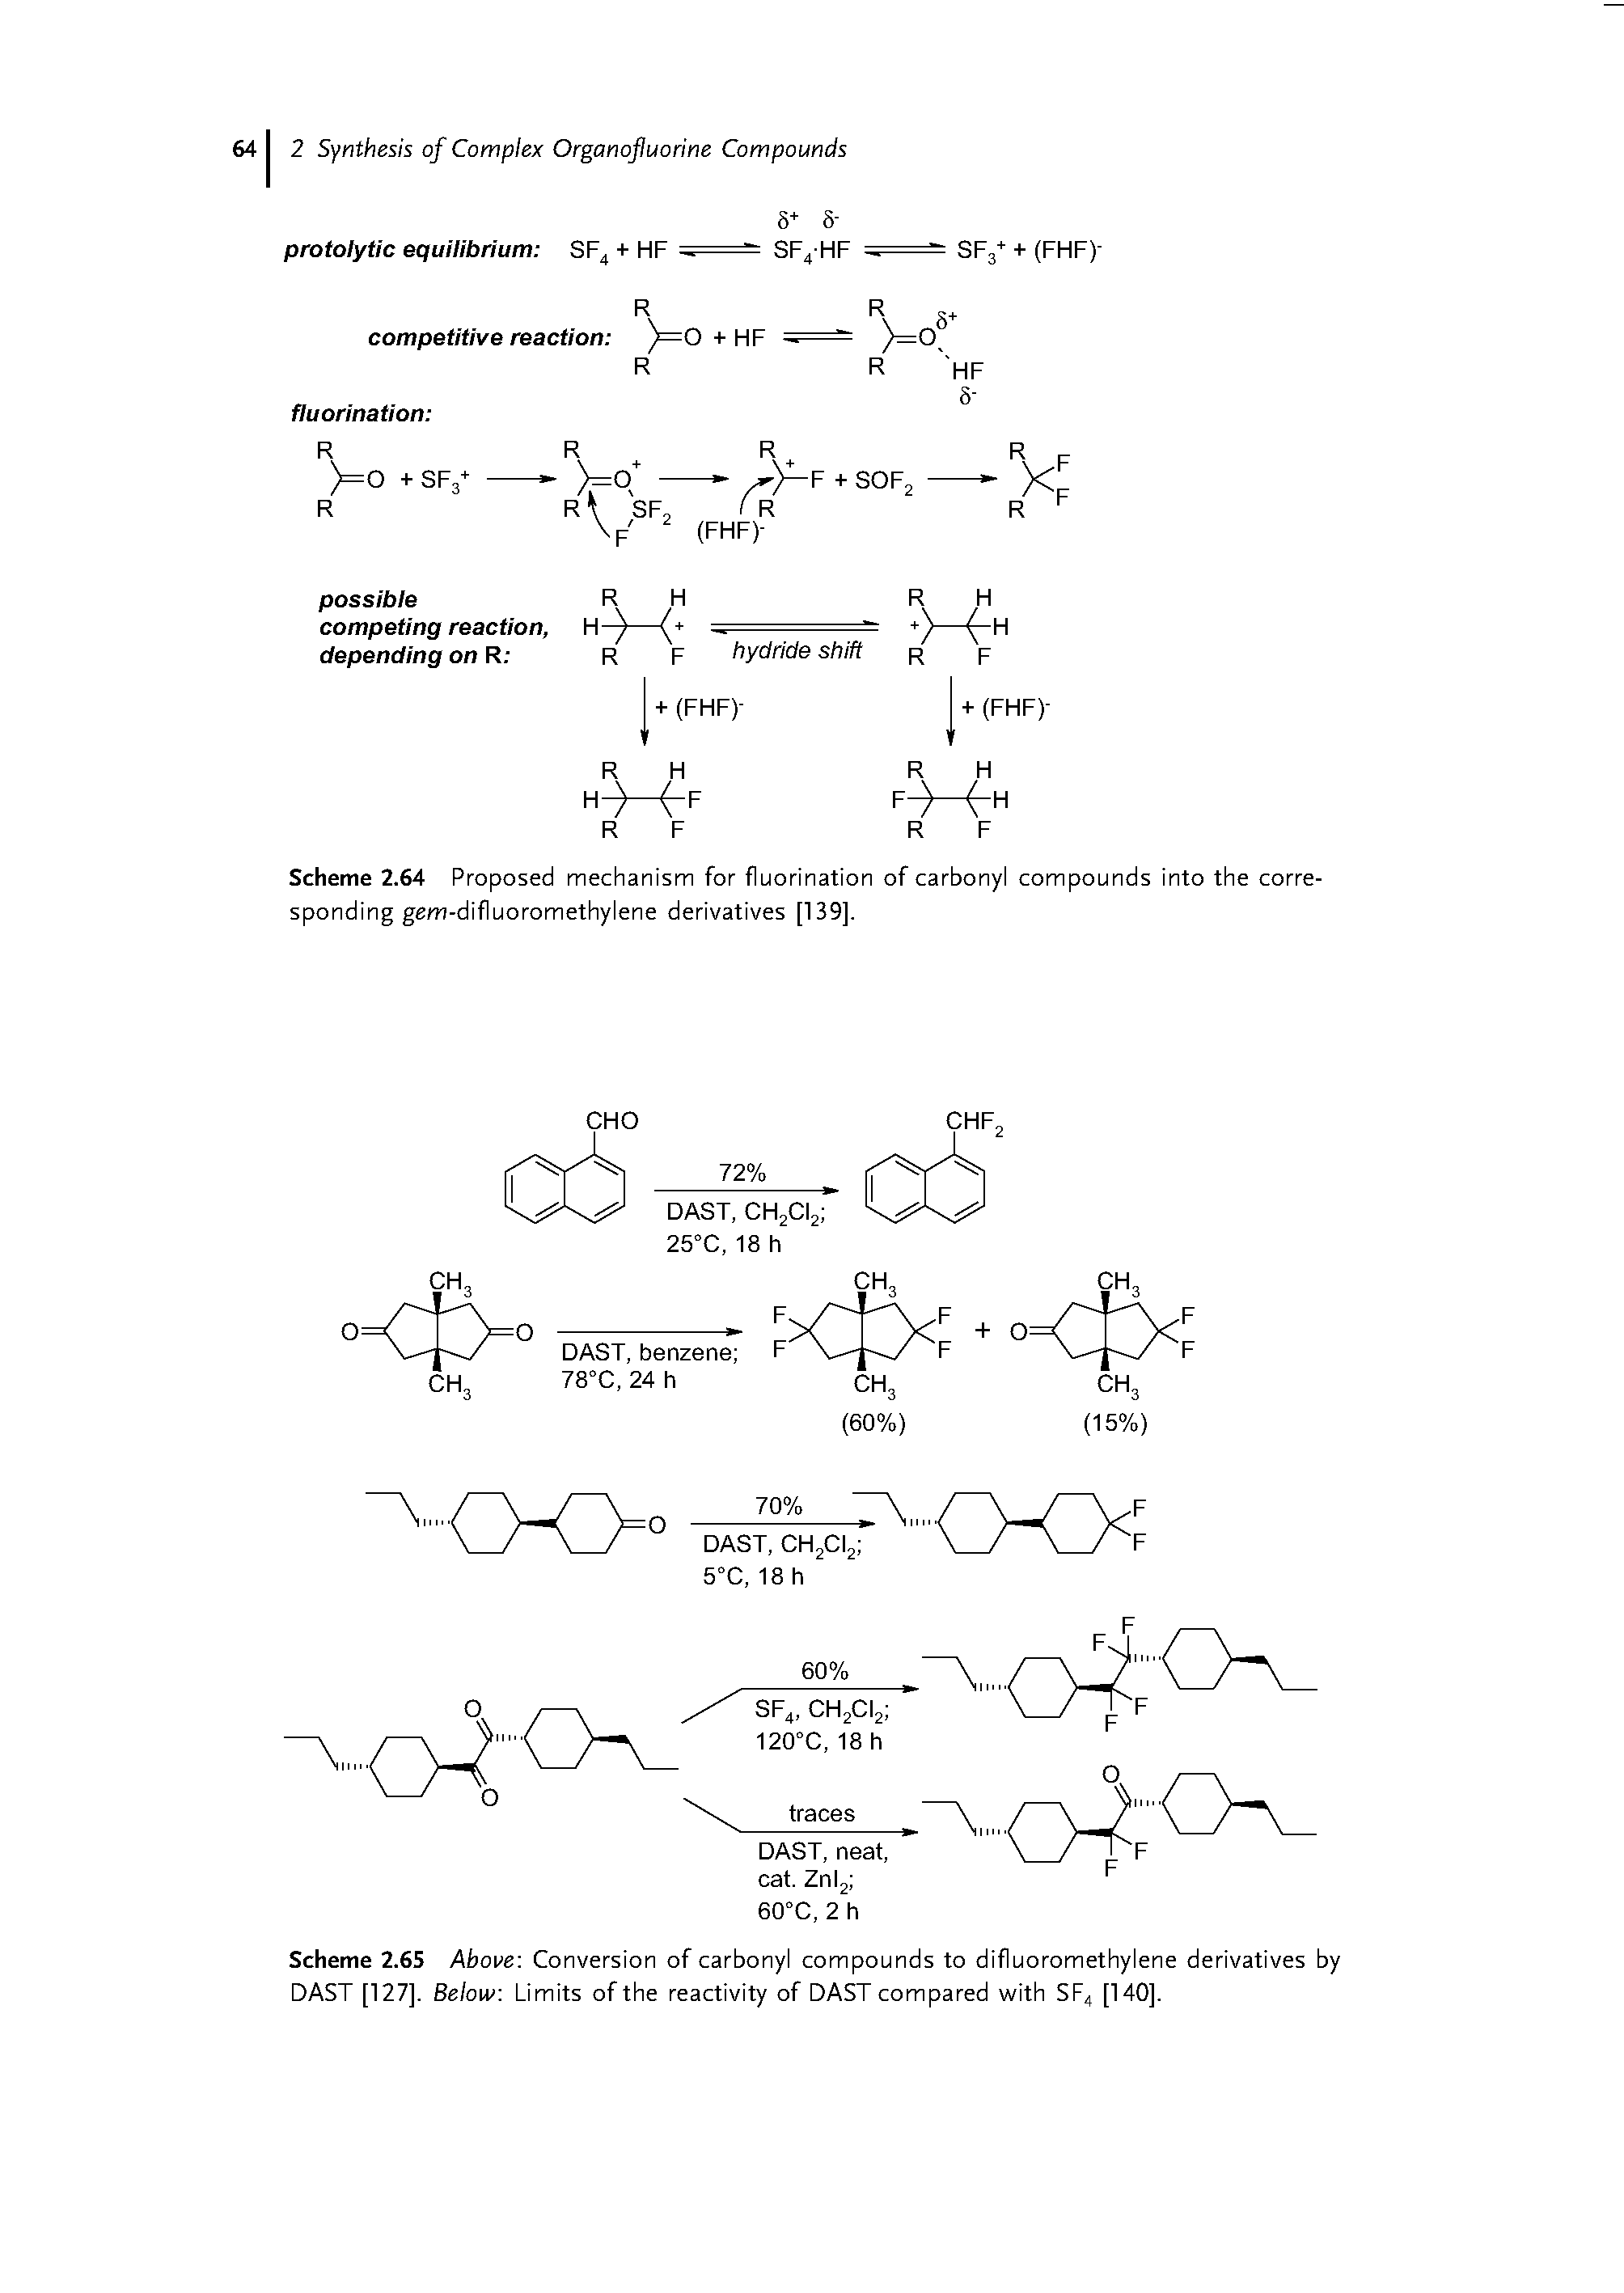 Scheme 2.65 Aboi e Conversion of carbonyl compounds to difluoromethylene derivatives by DAST [127]. Be/ow Limits of the reactivity of DAST compared with SF4 [140].